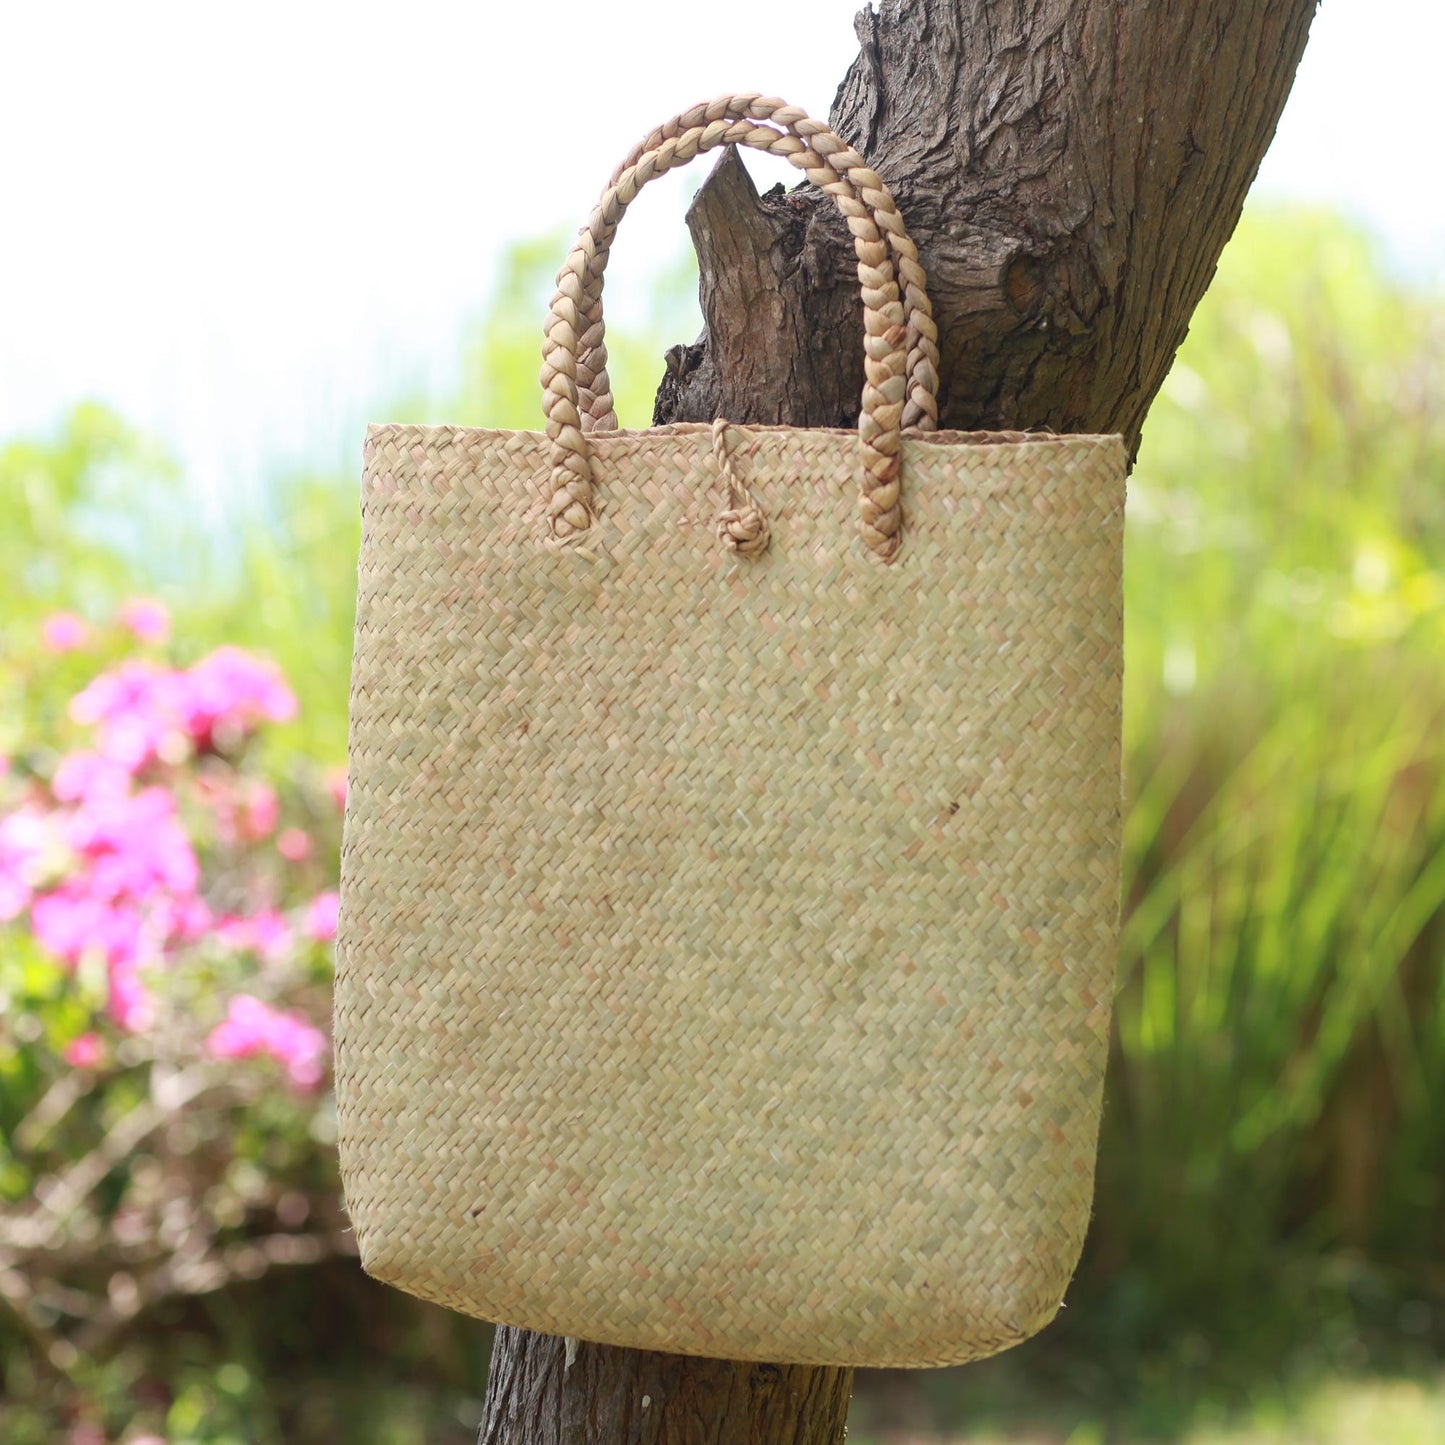 Sturdy Carrier Artisan Crafted Natural Fiber Tote Bag